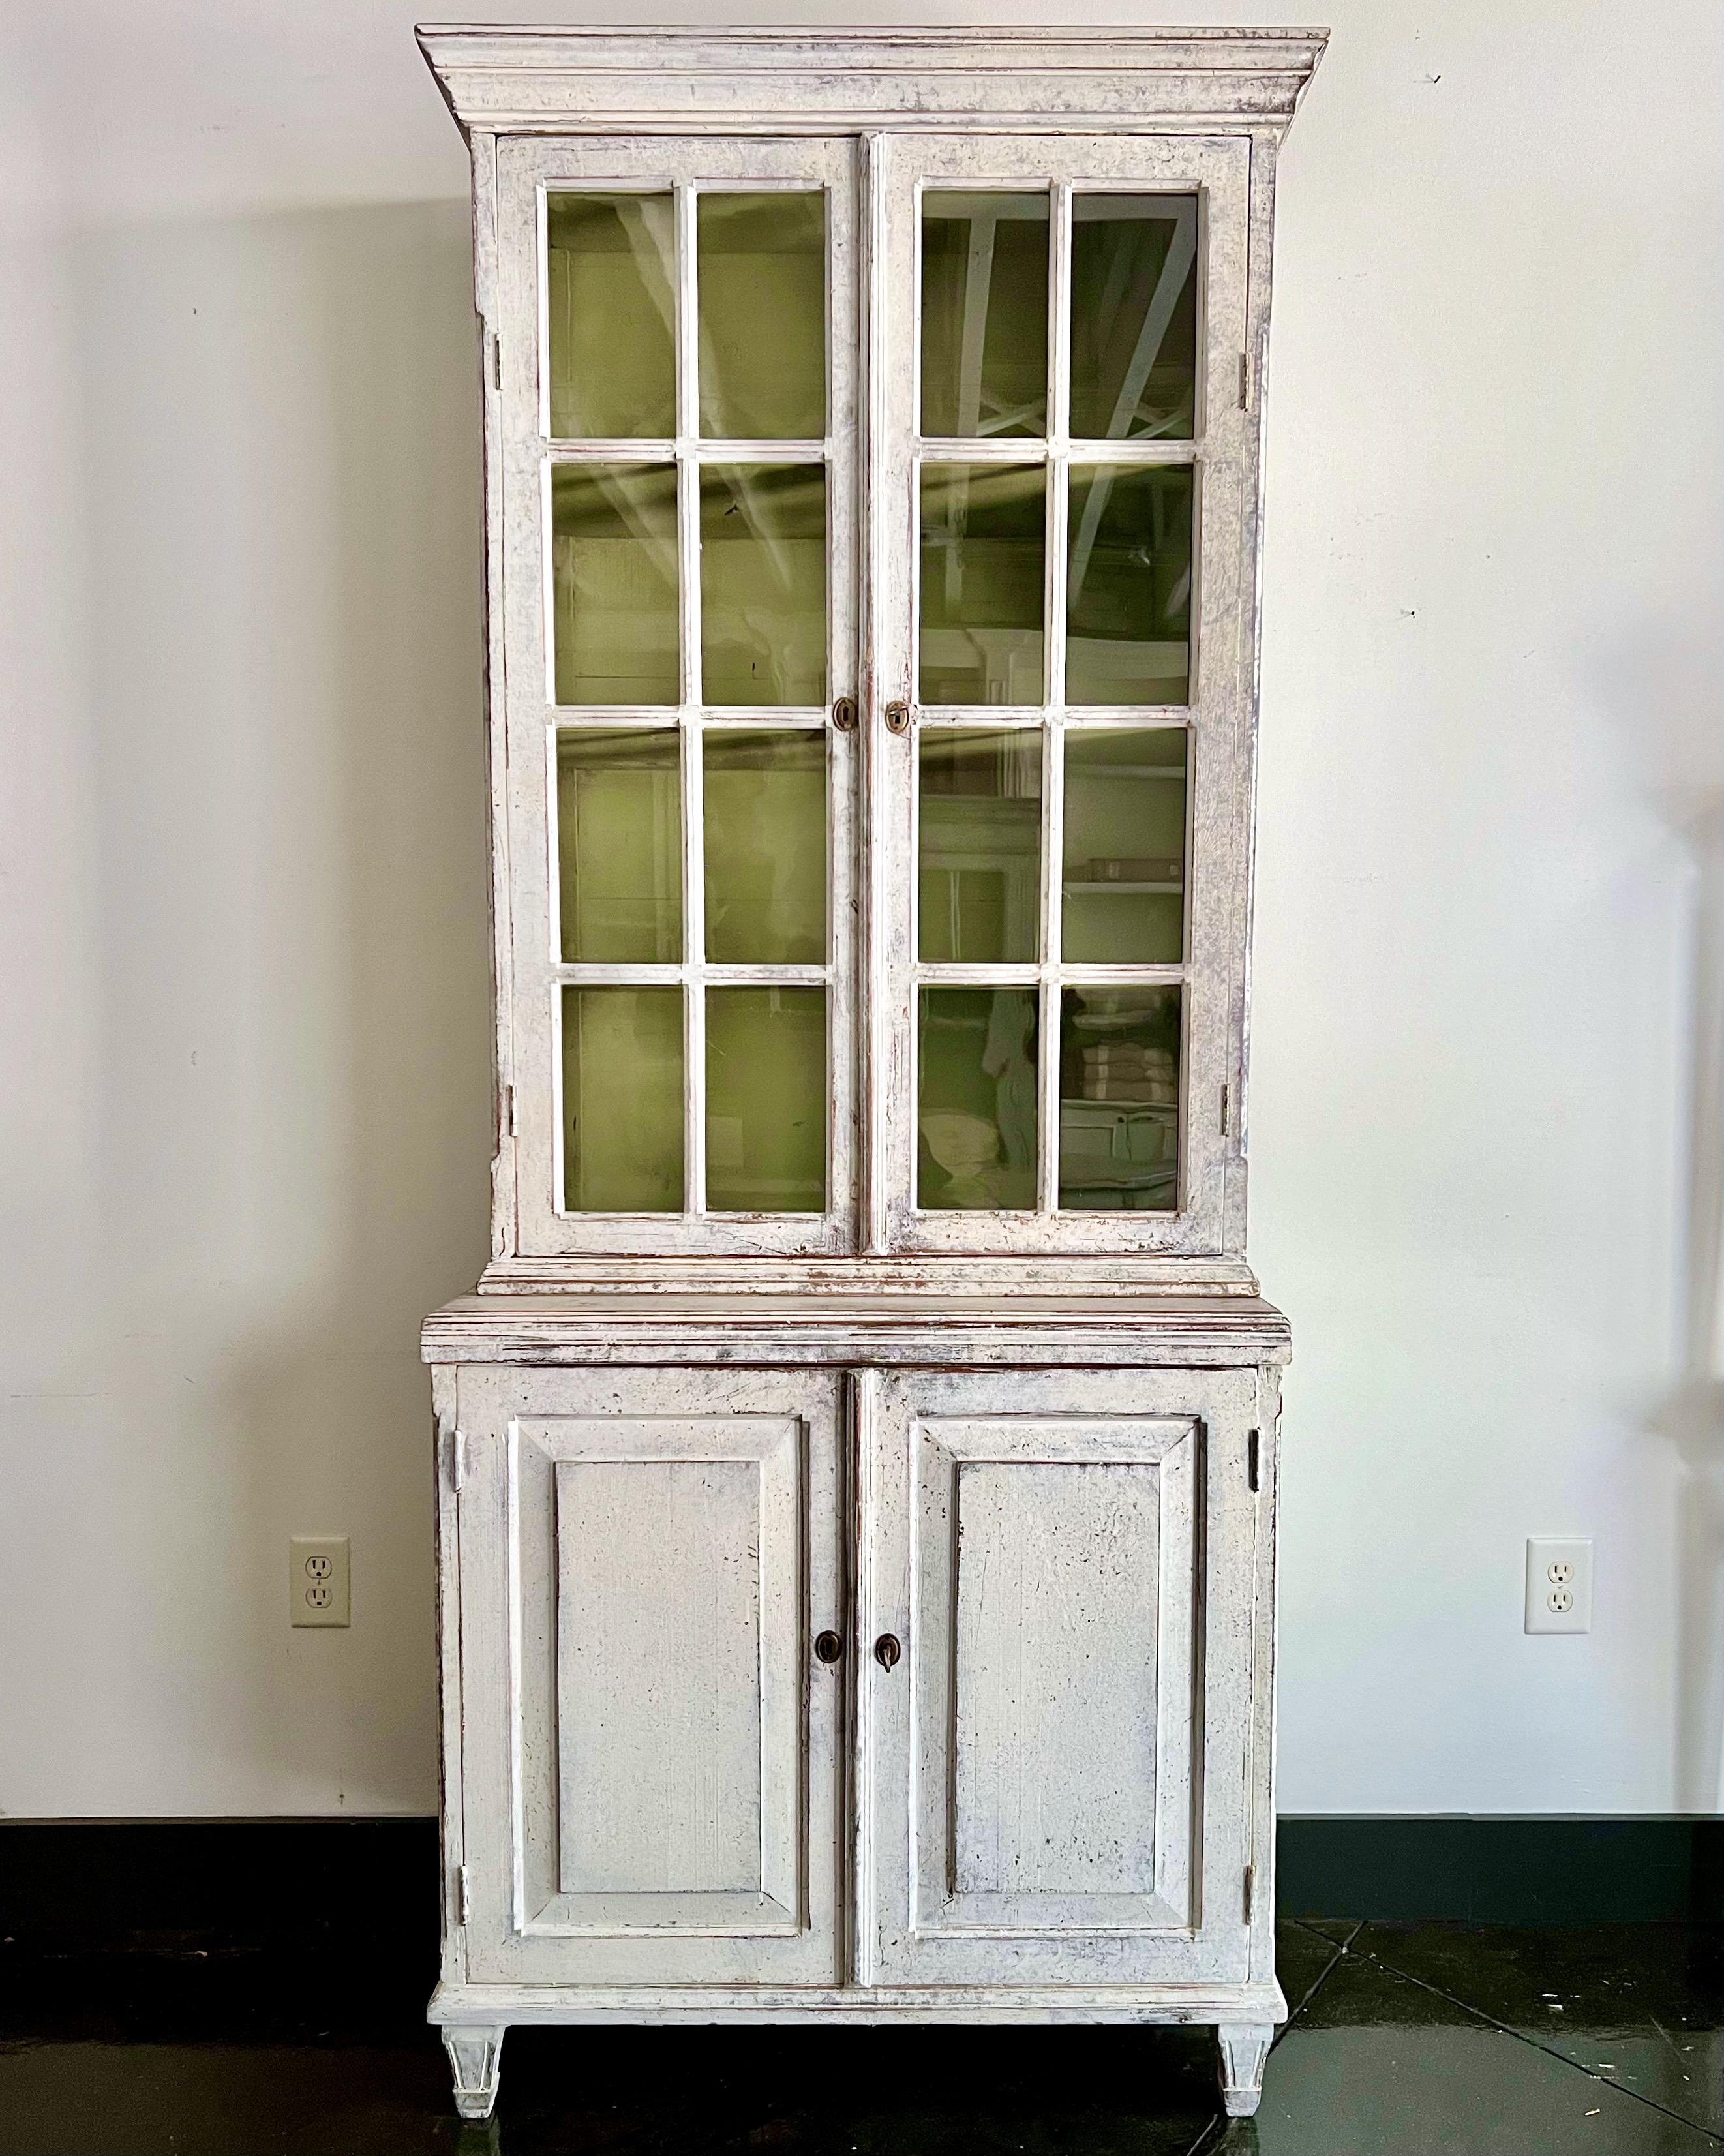 19th century Swedish cabinet with glass fronted doors in late Gustavian style.
Upper library section with molded cornice, four moveable shelves behind double glass doors.
The lower cabinet with molded door fronts and one shelf. All resting on carved